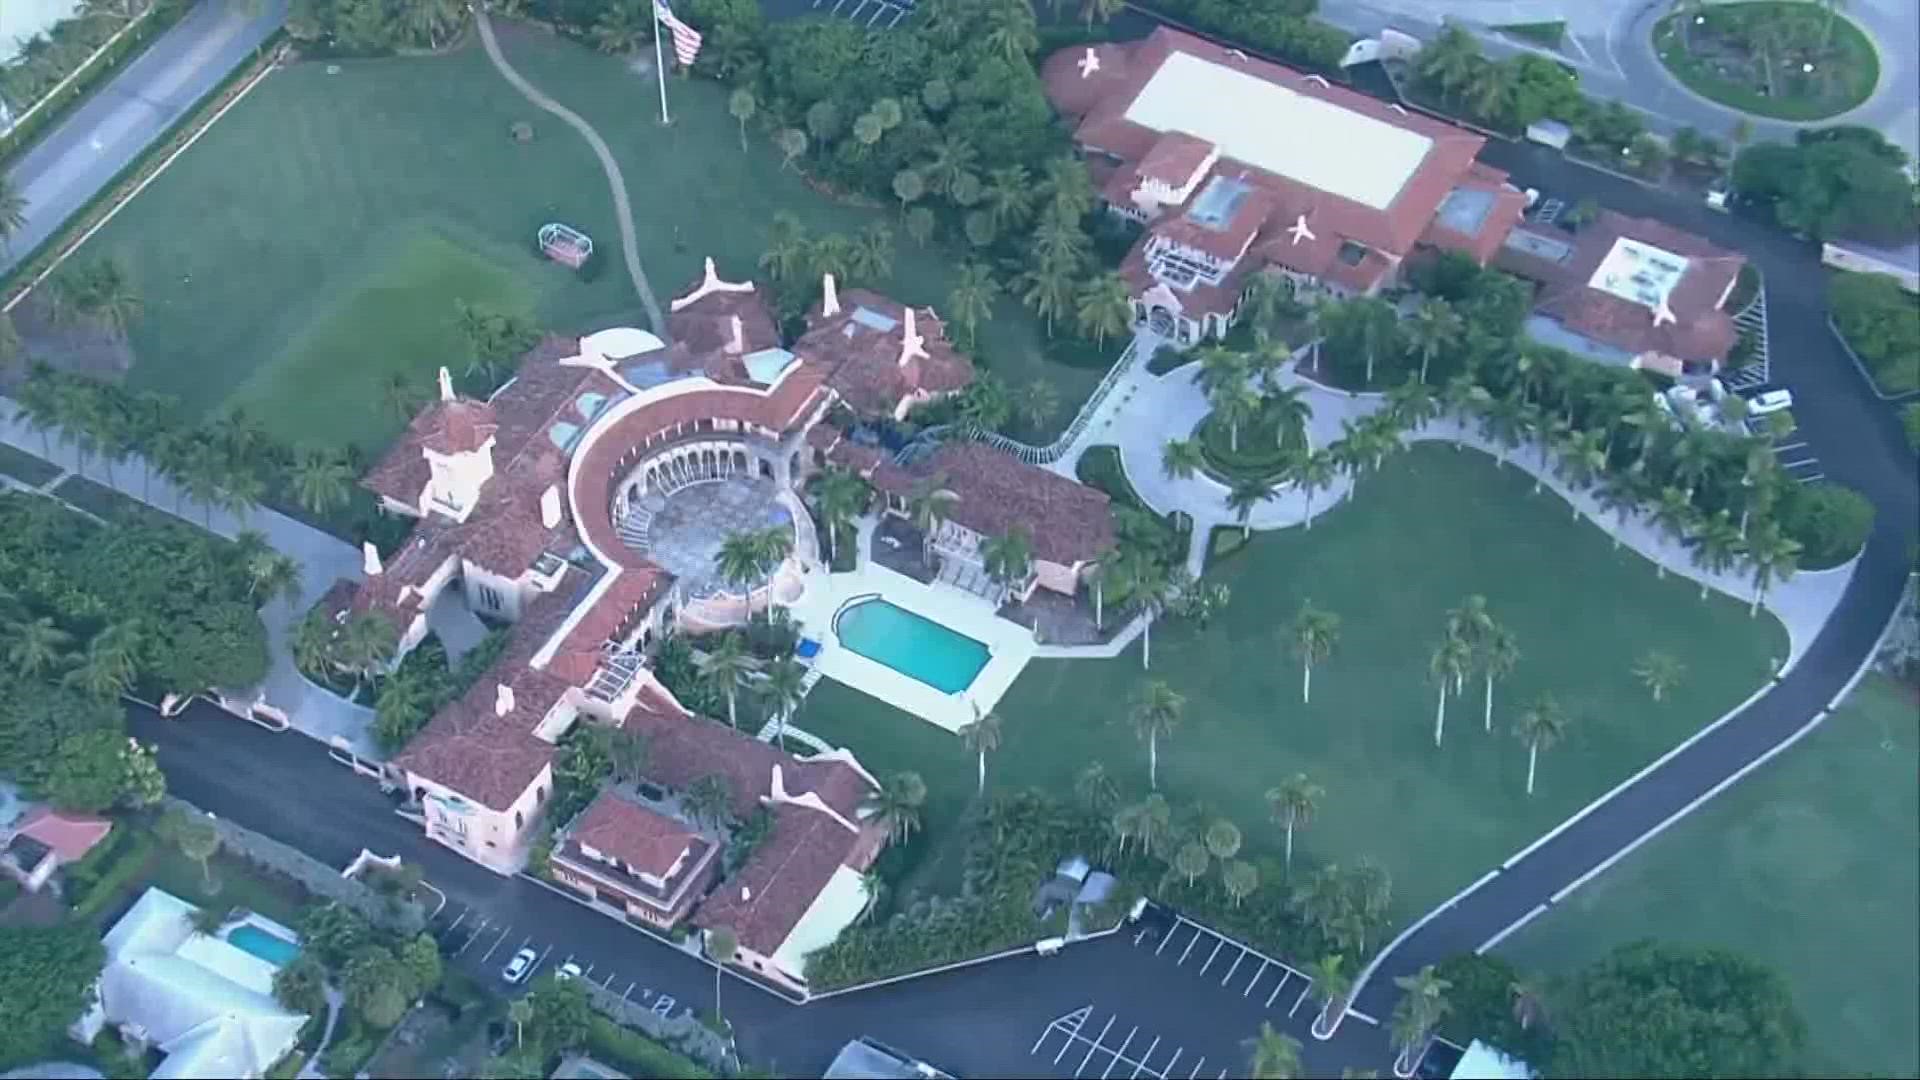 Agents on Monday searched Trump’s Mar-a-Lago estate, which is also a private club, as part of a federal investigation into whether he took classified records.